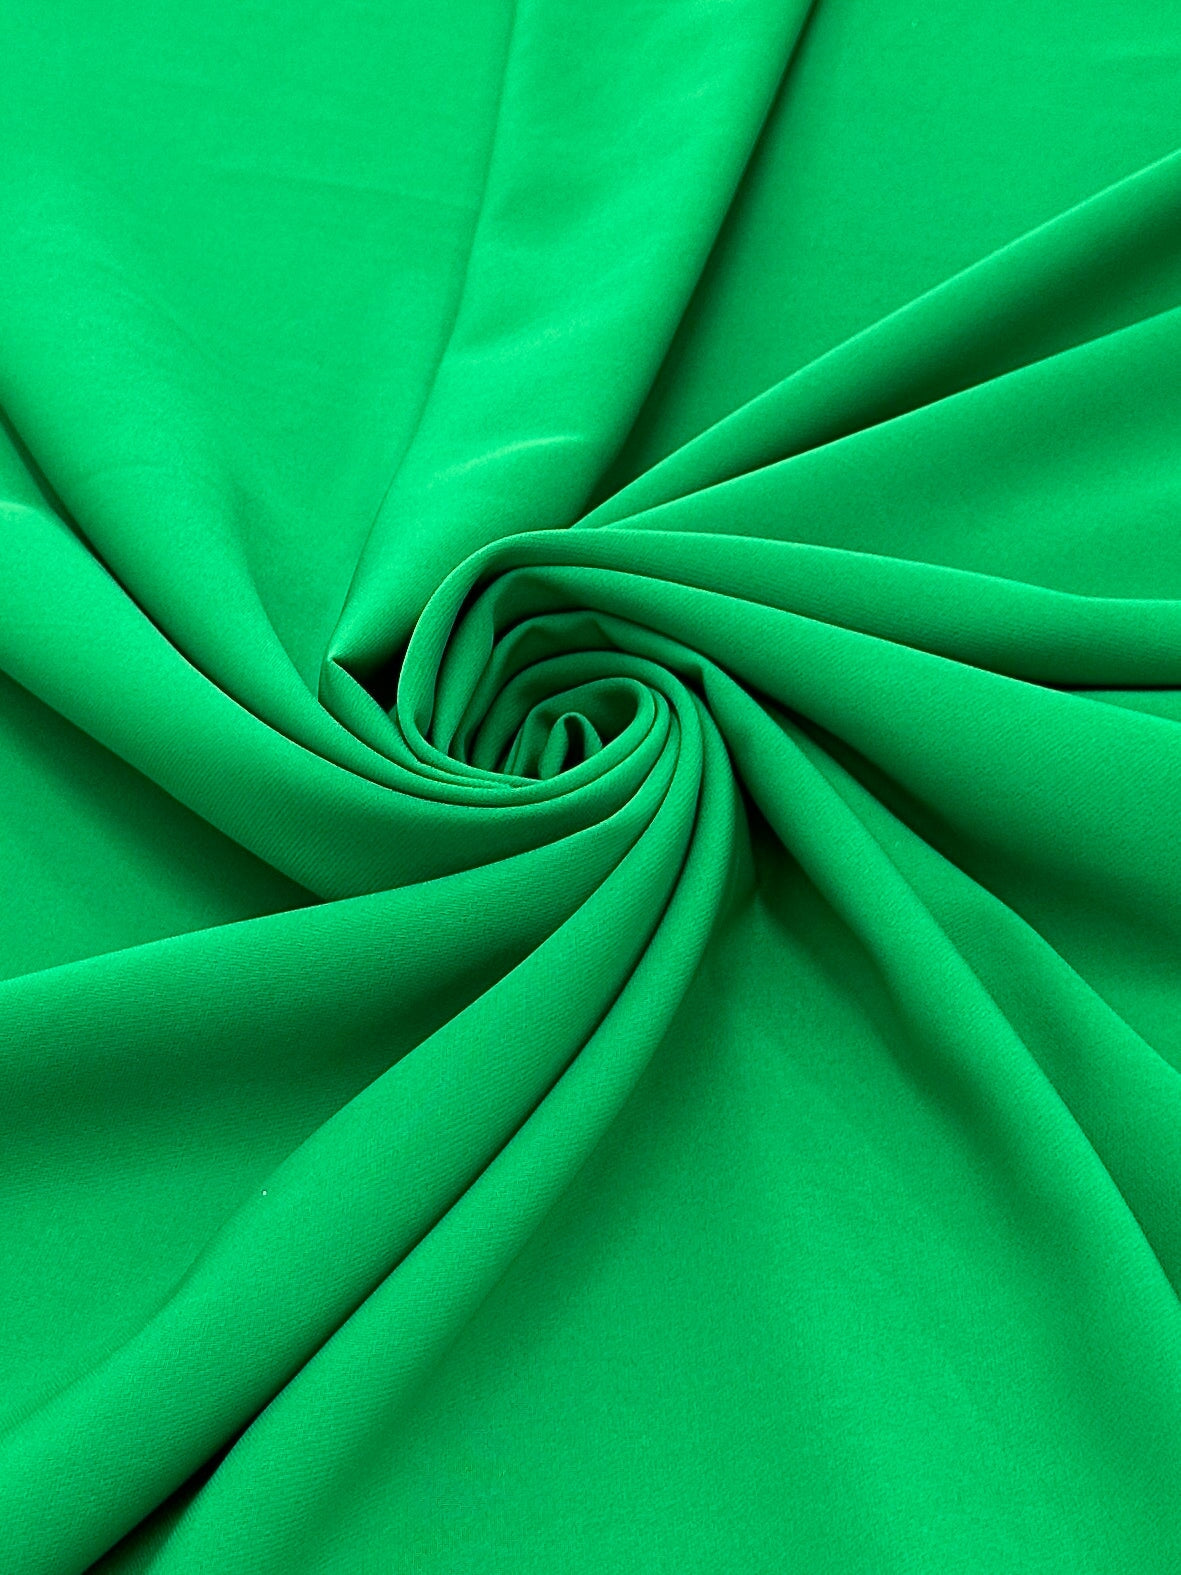 stretch crepe, brushed twill, brushed crepe, poly gabardine, polyester gabardine, gabardine material, poplin gabardine, poly poplin, polyester, poplin twill, poplin fabric, green stretch crepe, olive green crepe, dark green fabric, fabric on sale, discounted fabric, bridal fabric crepe. green bridal fabric, 4 way stretch, fabric on demand